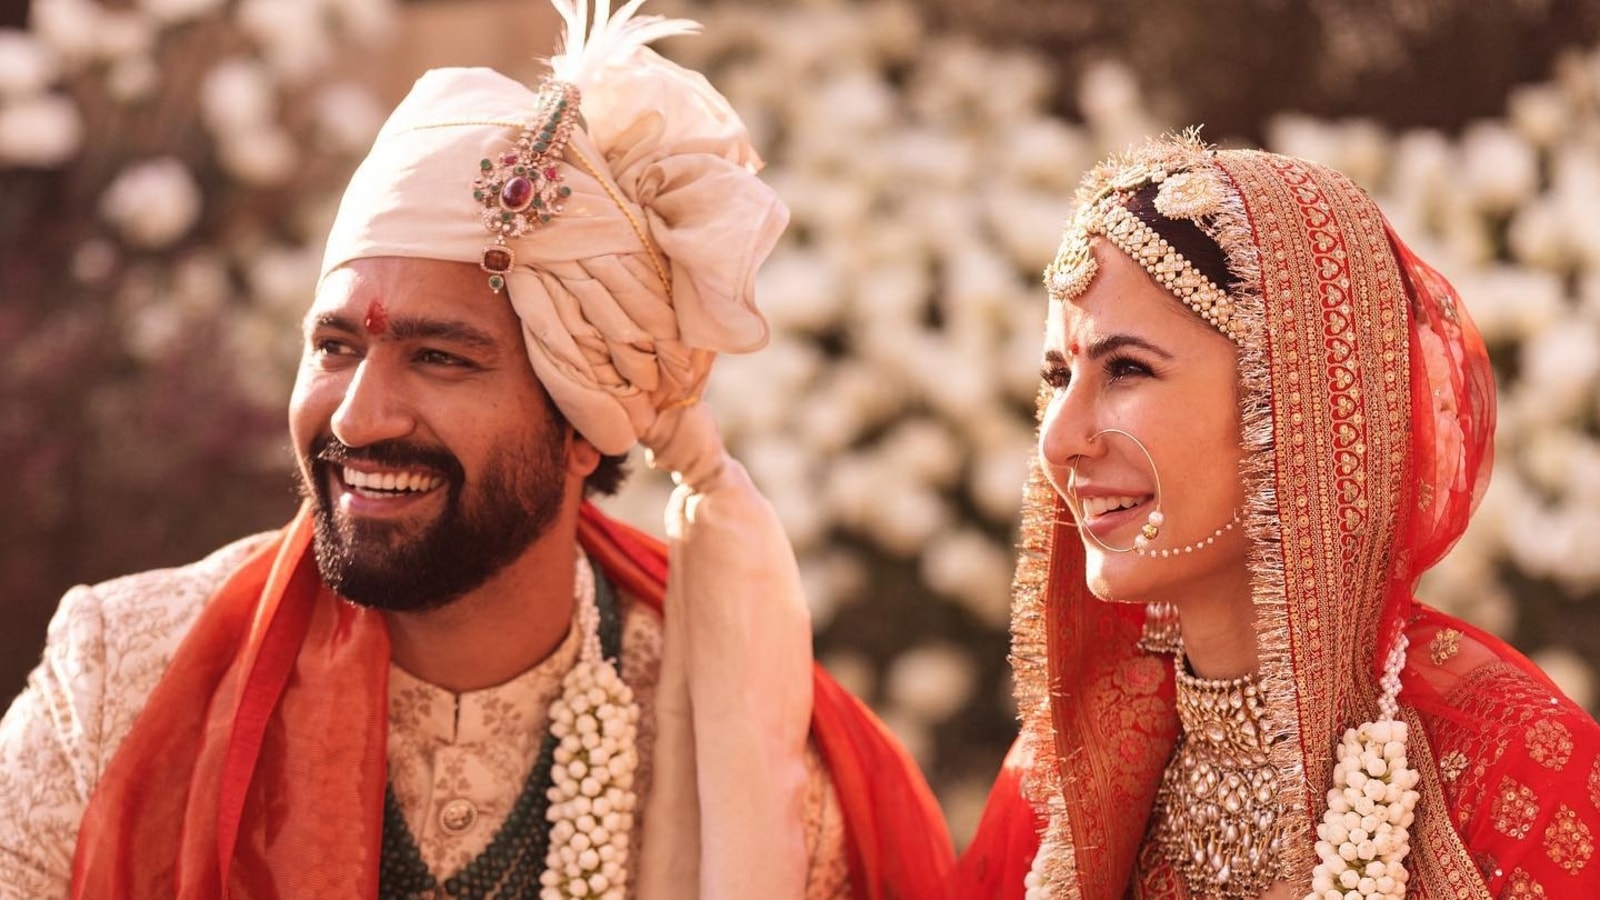 Vicky Kaushal’s stylist recalls actor was ‘chillest groom’, reveals what Katrina Kaif asked about him during wedding